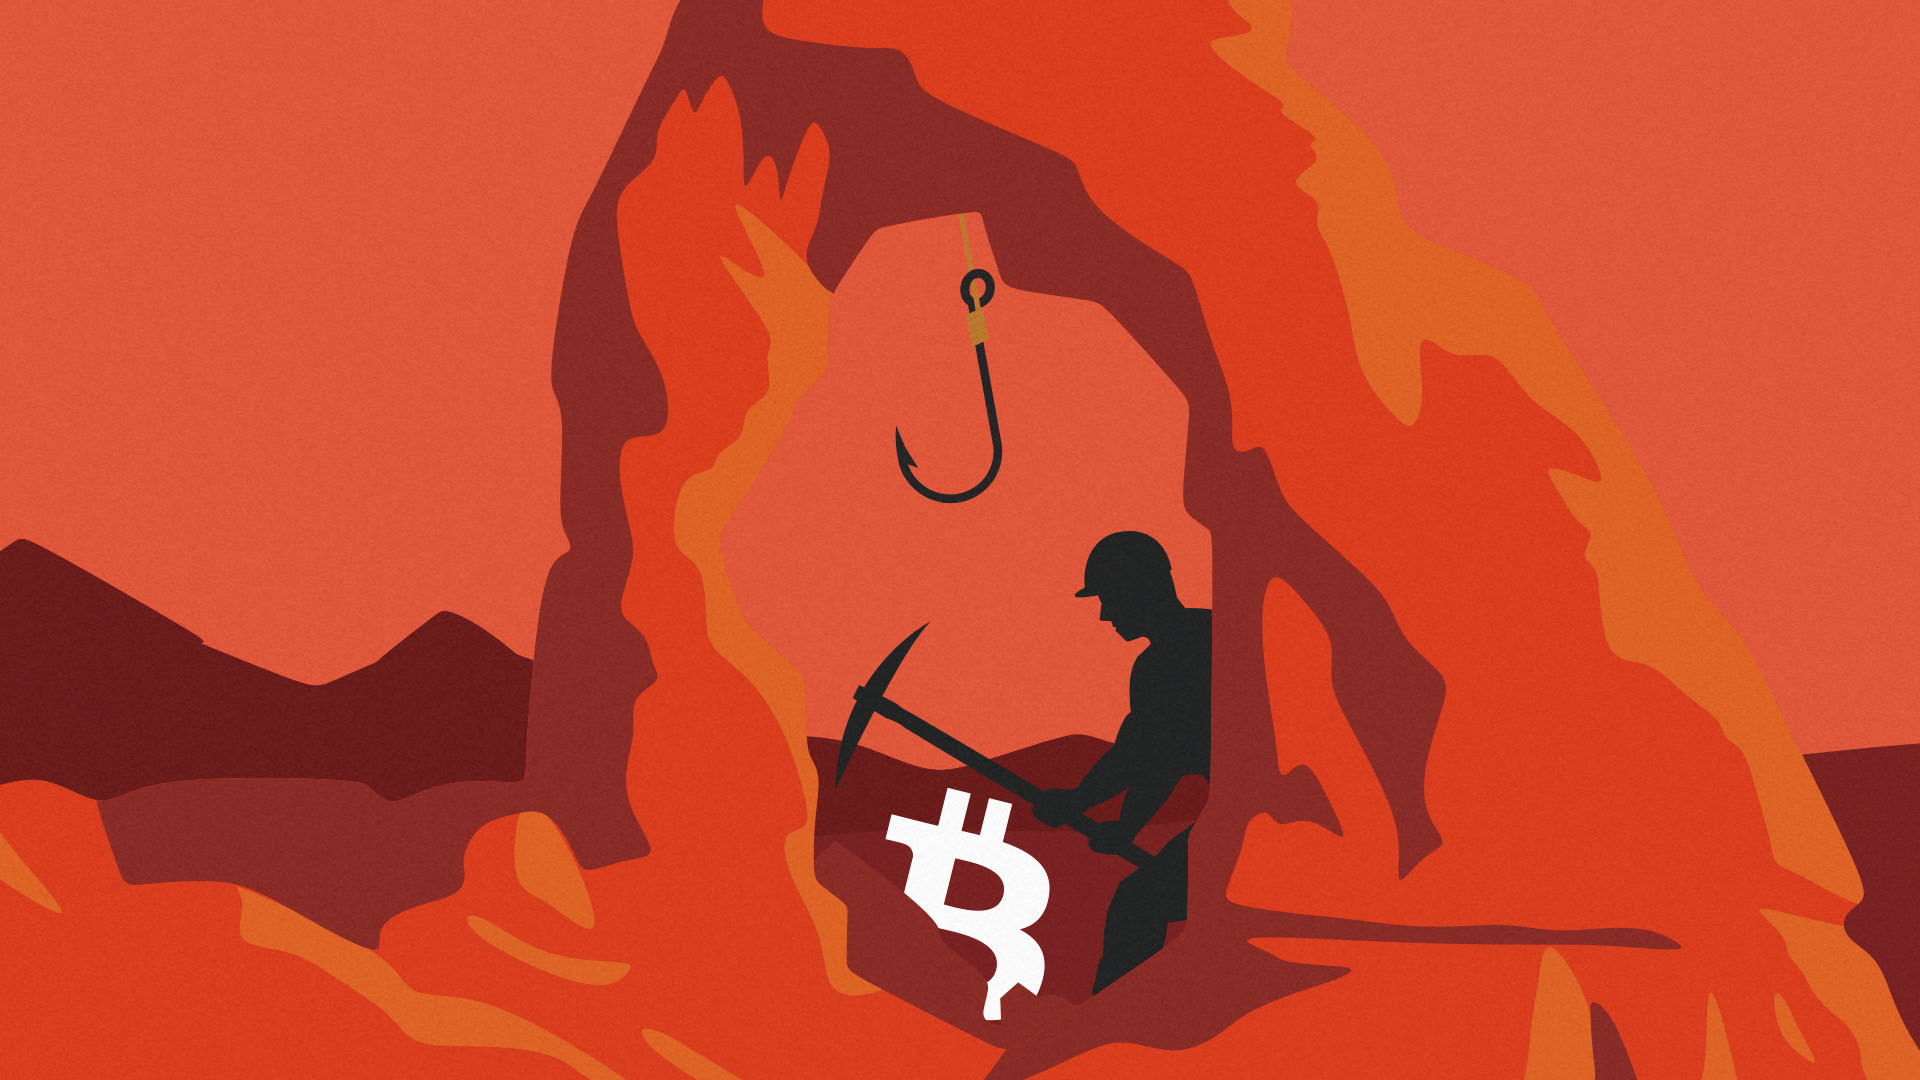 This Alleged Bitcoin Scam Looked a Lot Like a Pyramid Scheme | WIRED